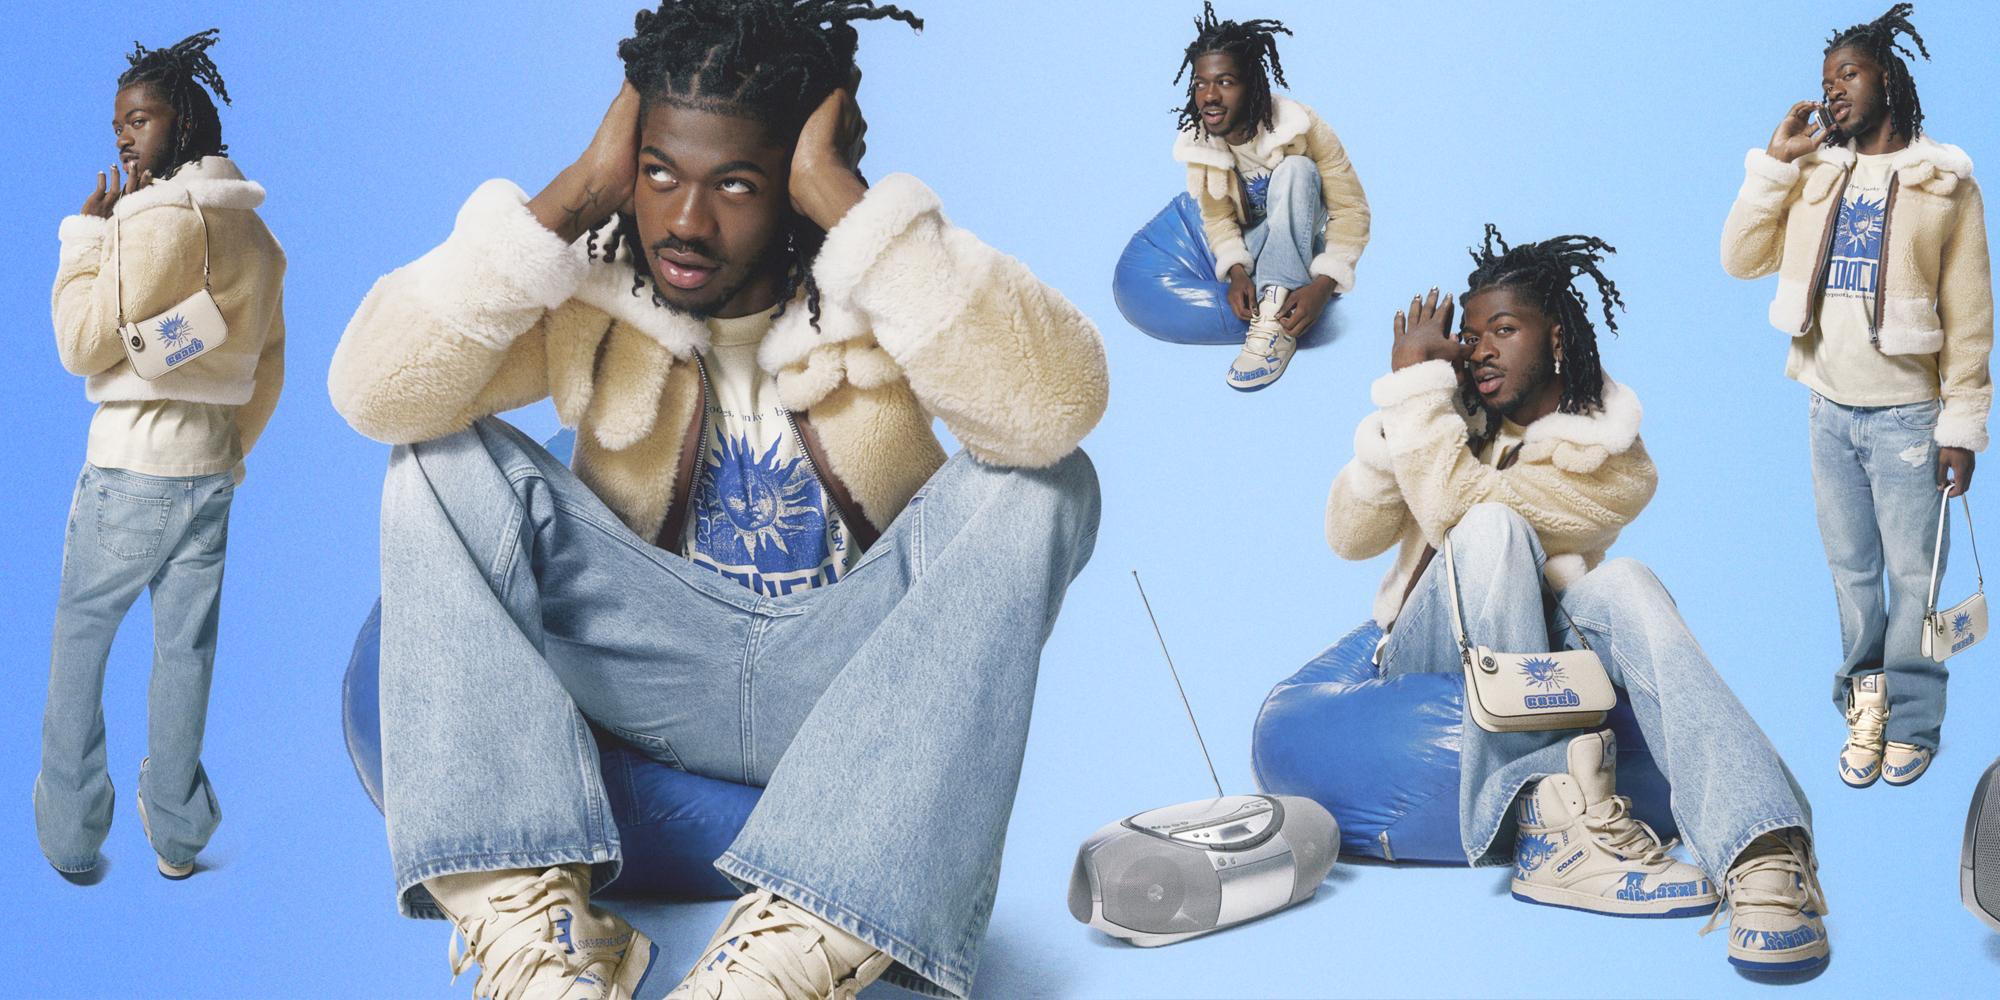 COACH X LIL NAS X WINTER 2023 CAPSULE COLLECTION